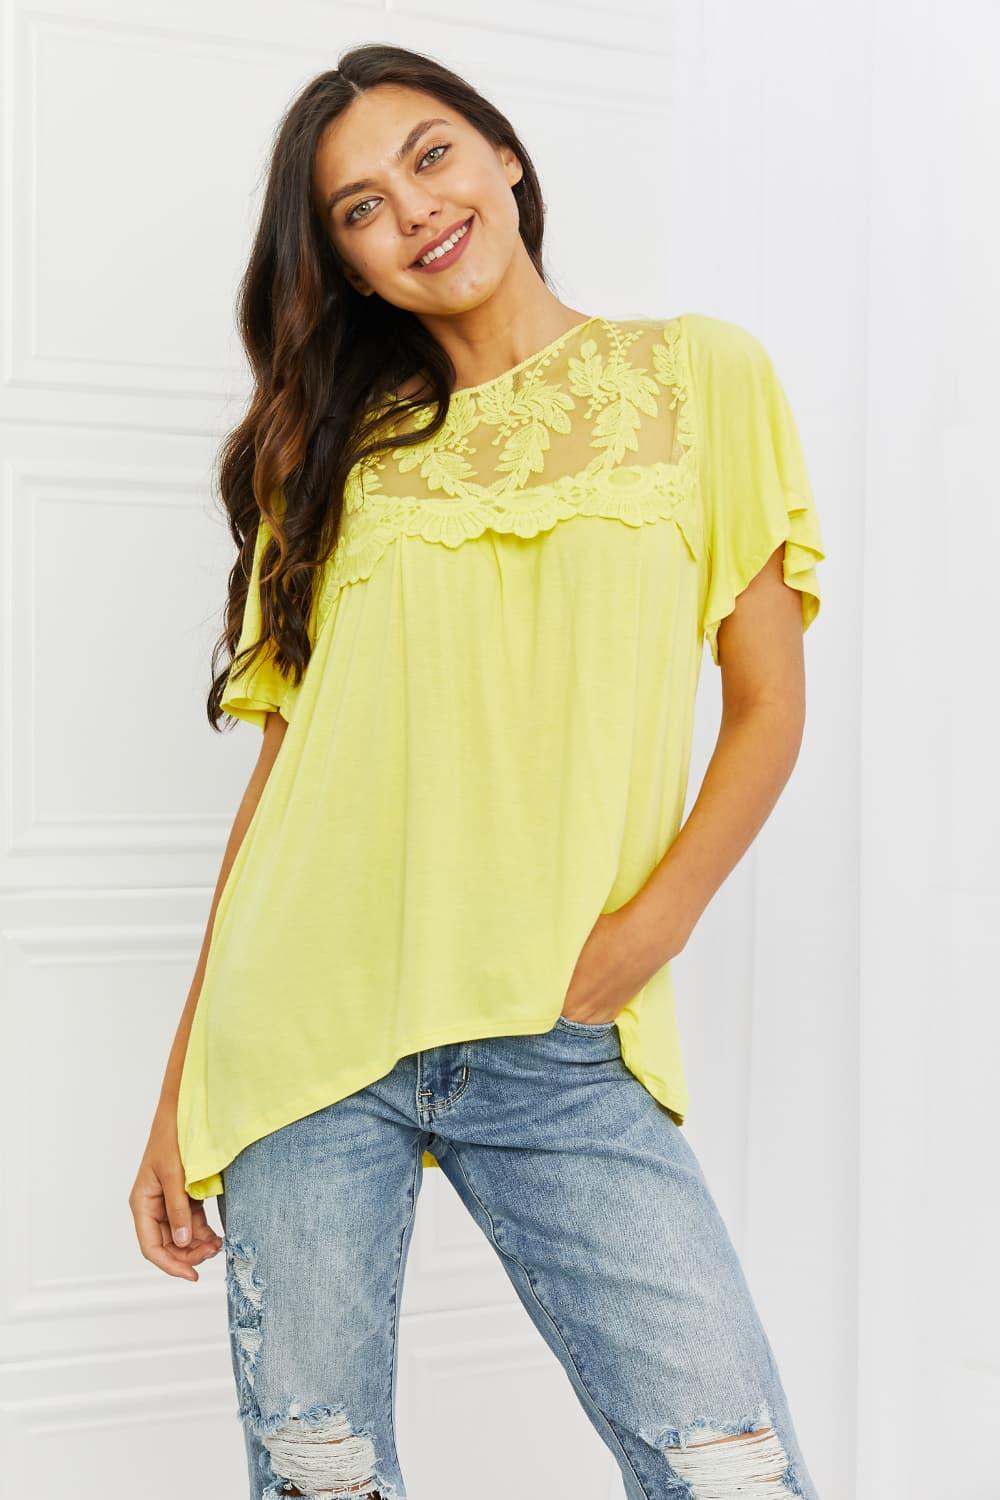 Culture Code Ready To Go Full Size Lace Embroidered Top in Yellow Mousse - Glamorous Boutique USA L.L.C.